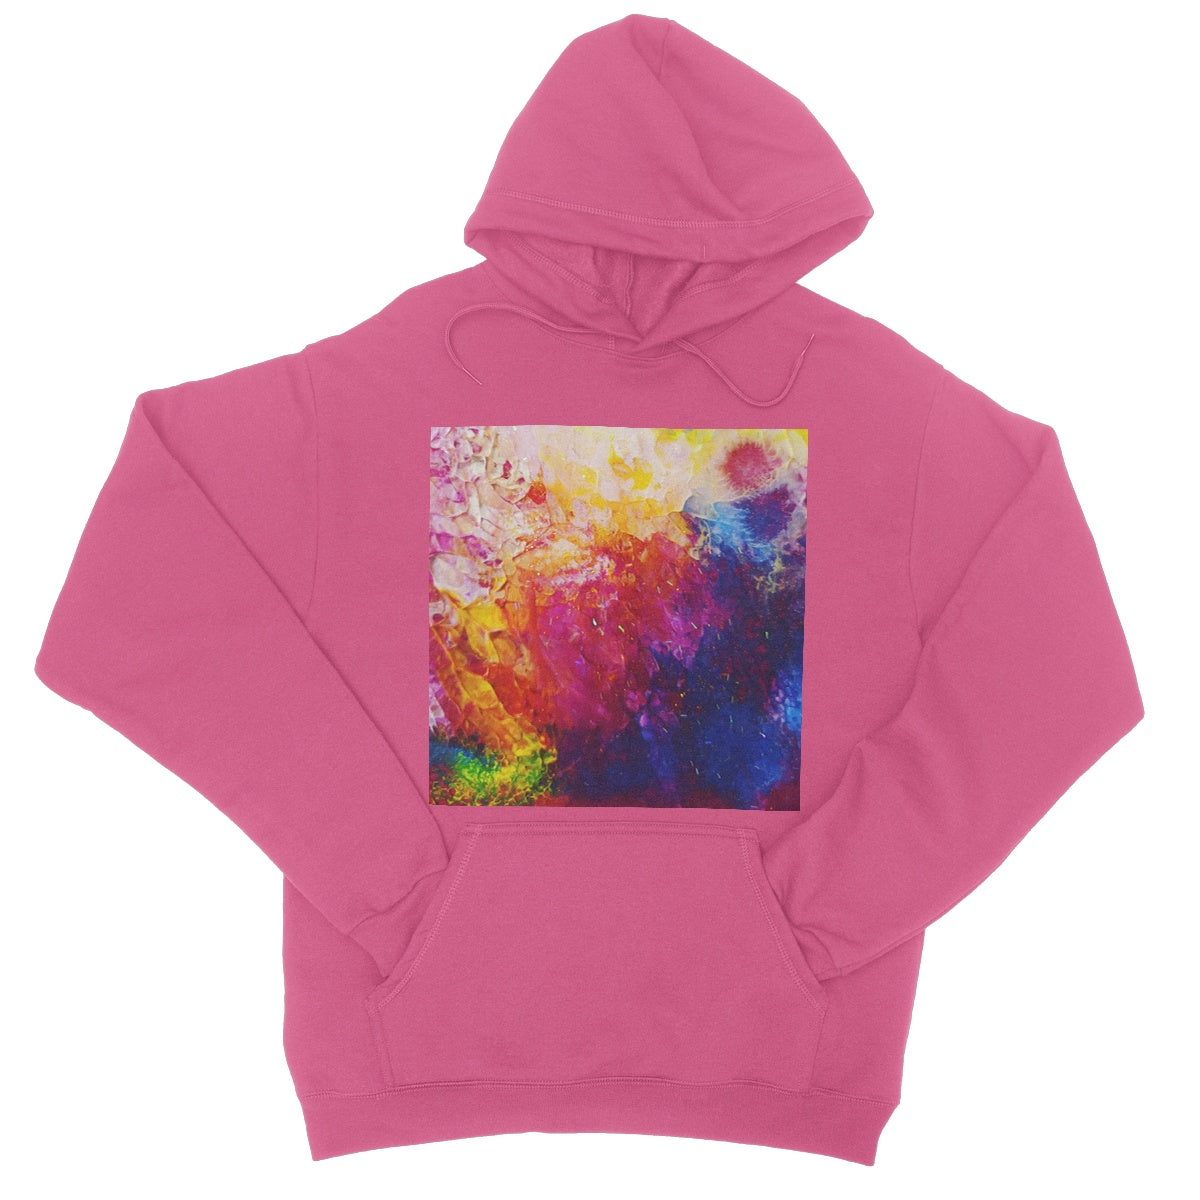 Colour Of Love College Hoodie